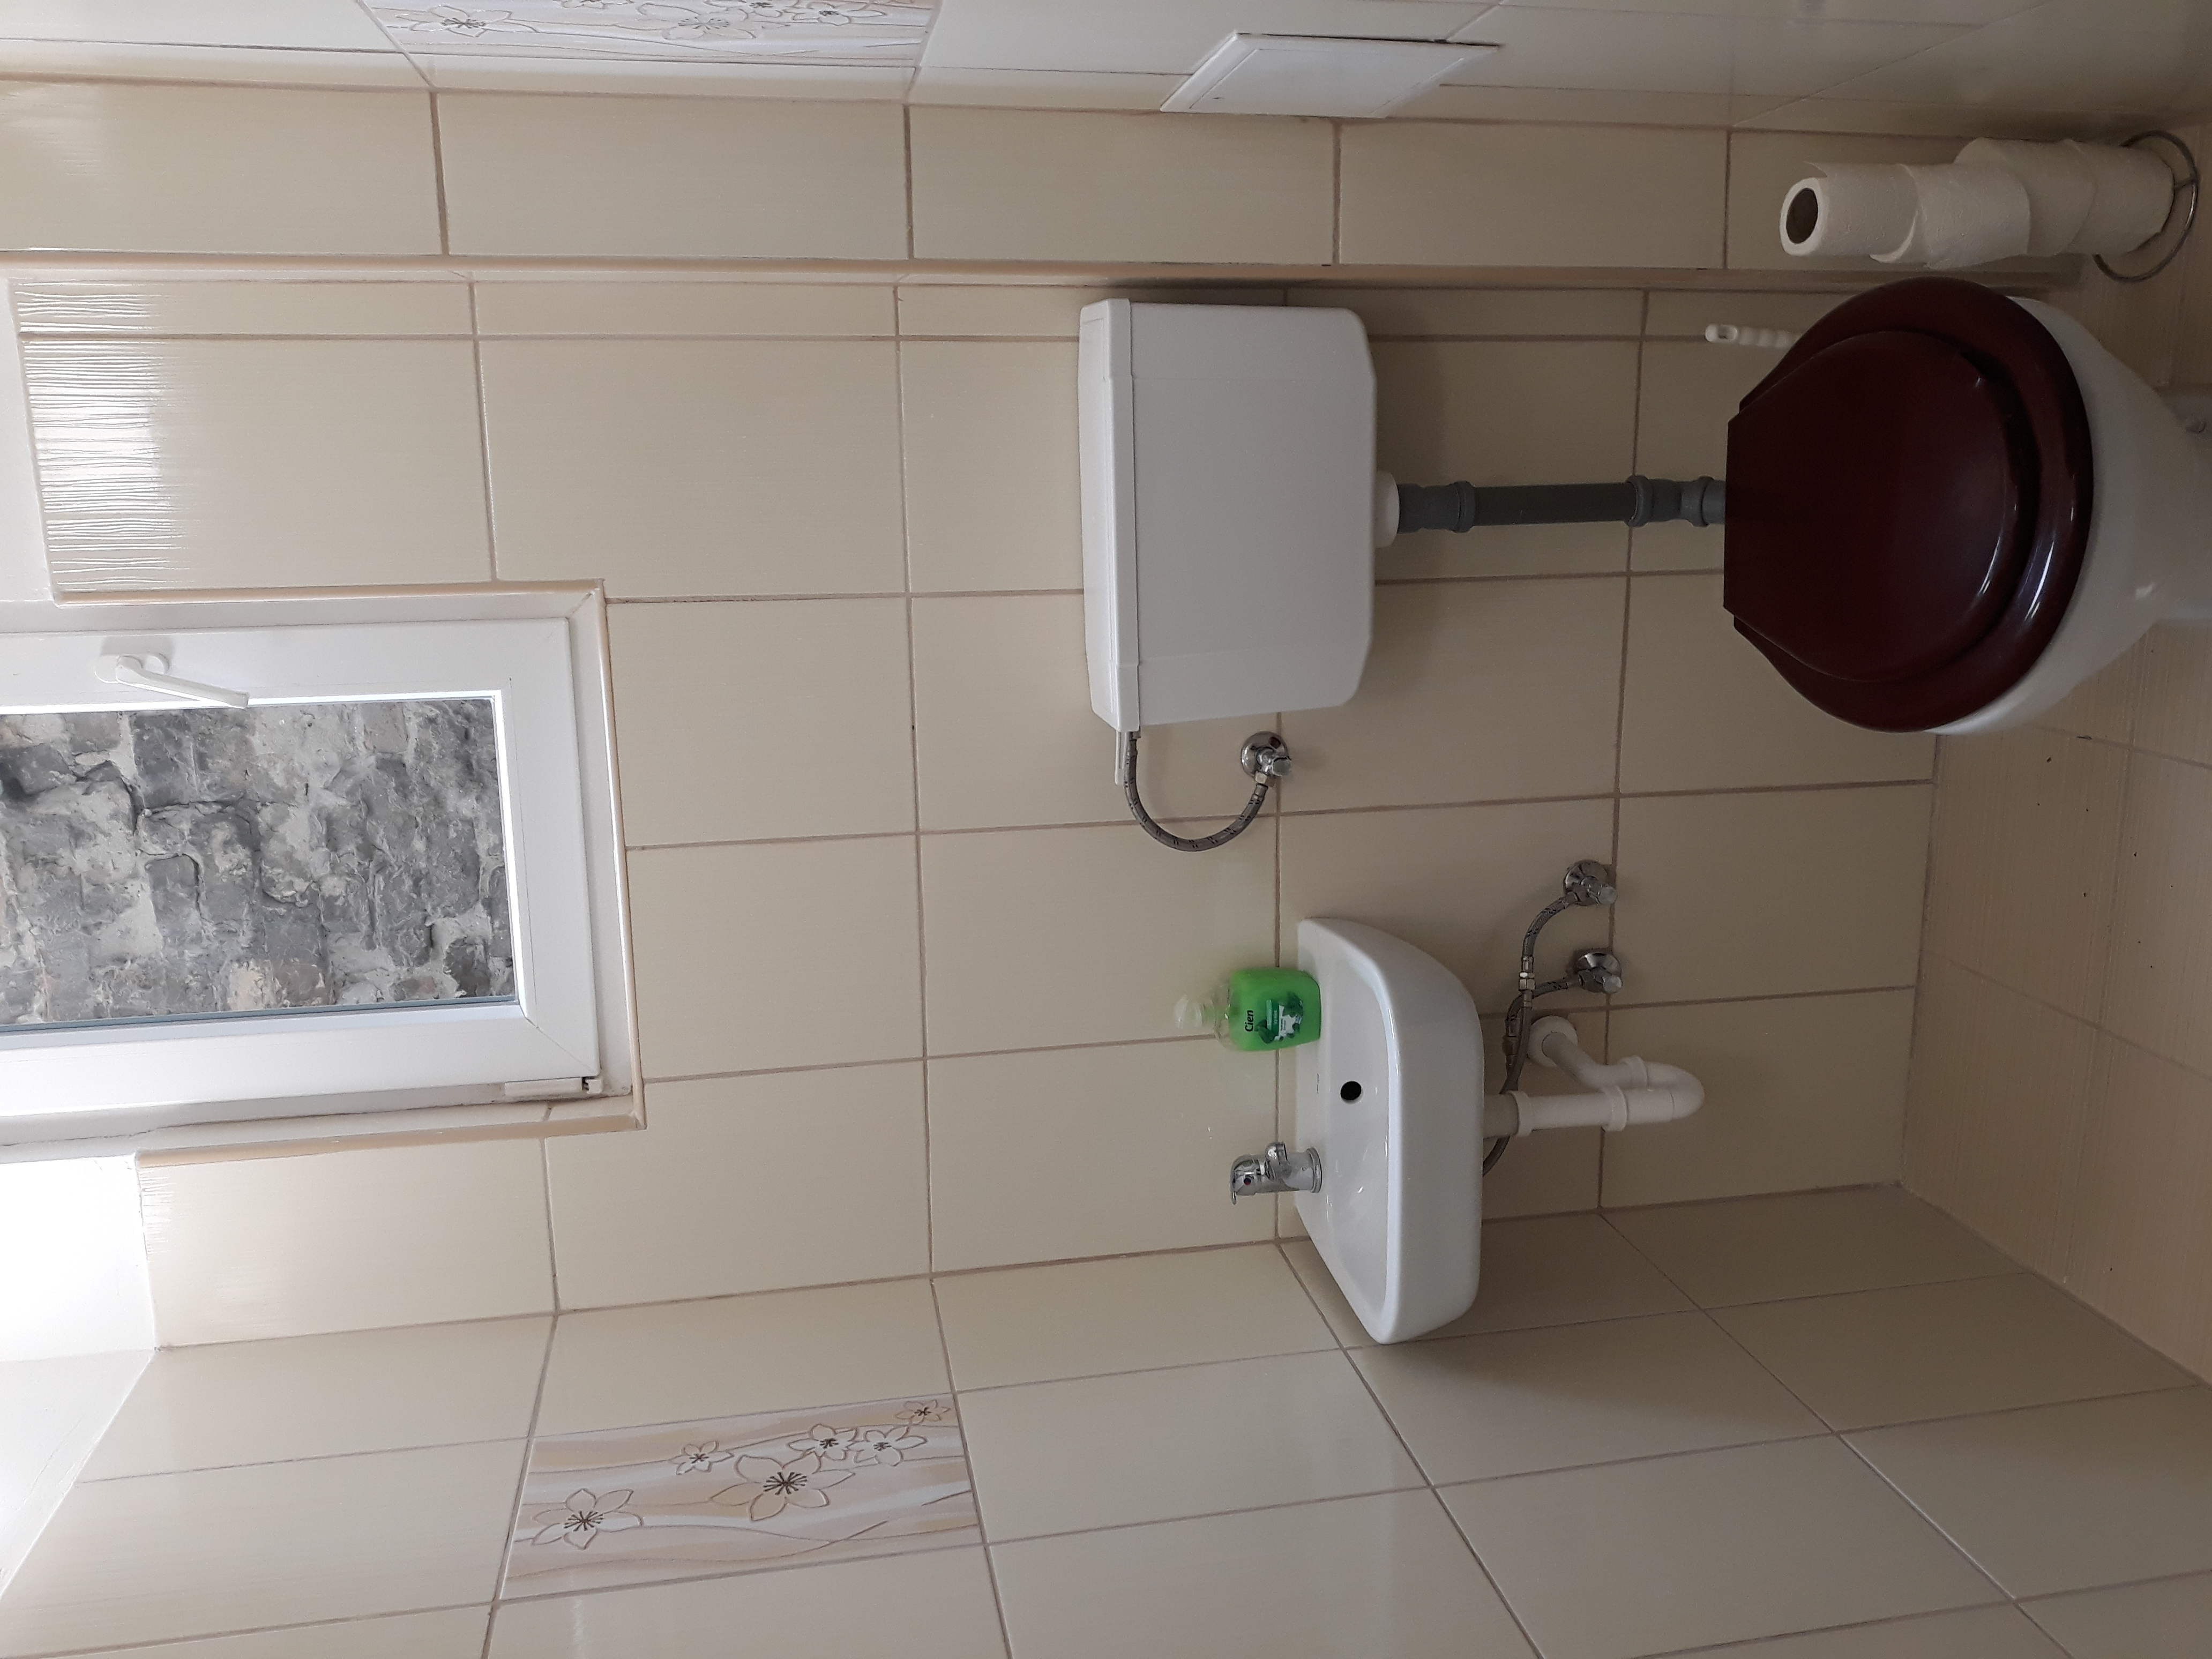 Szk20-bathroom,flats to let for long term